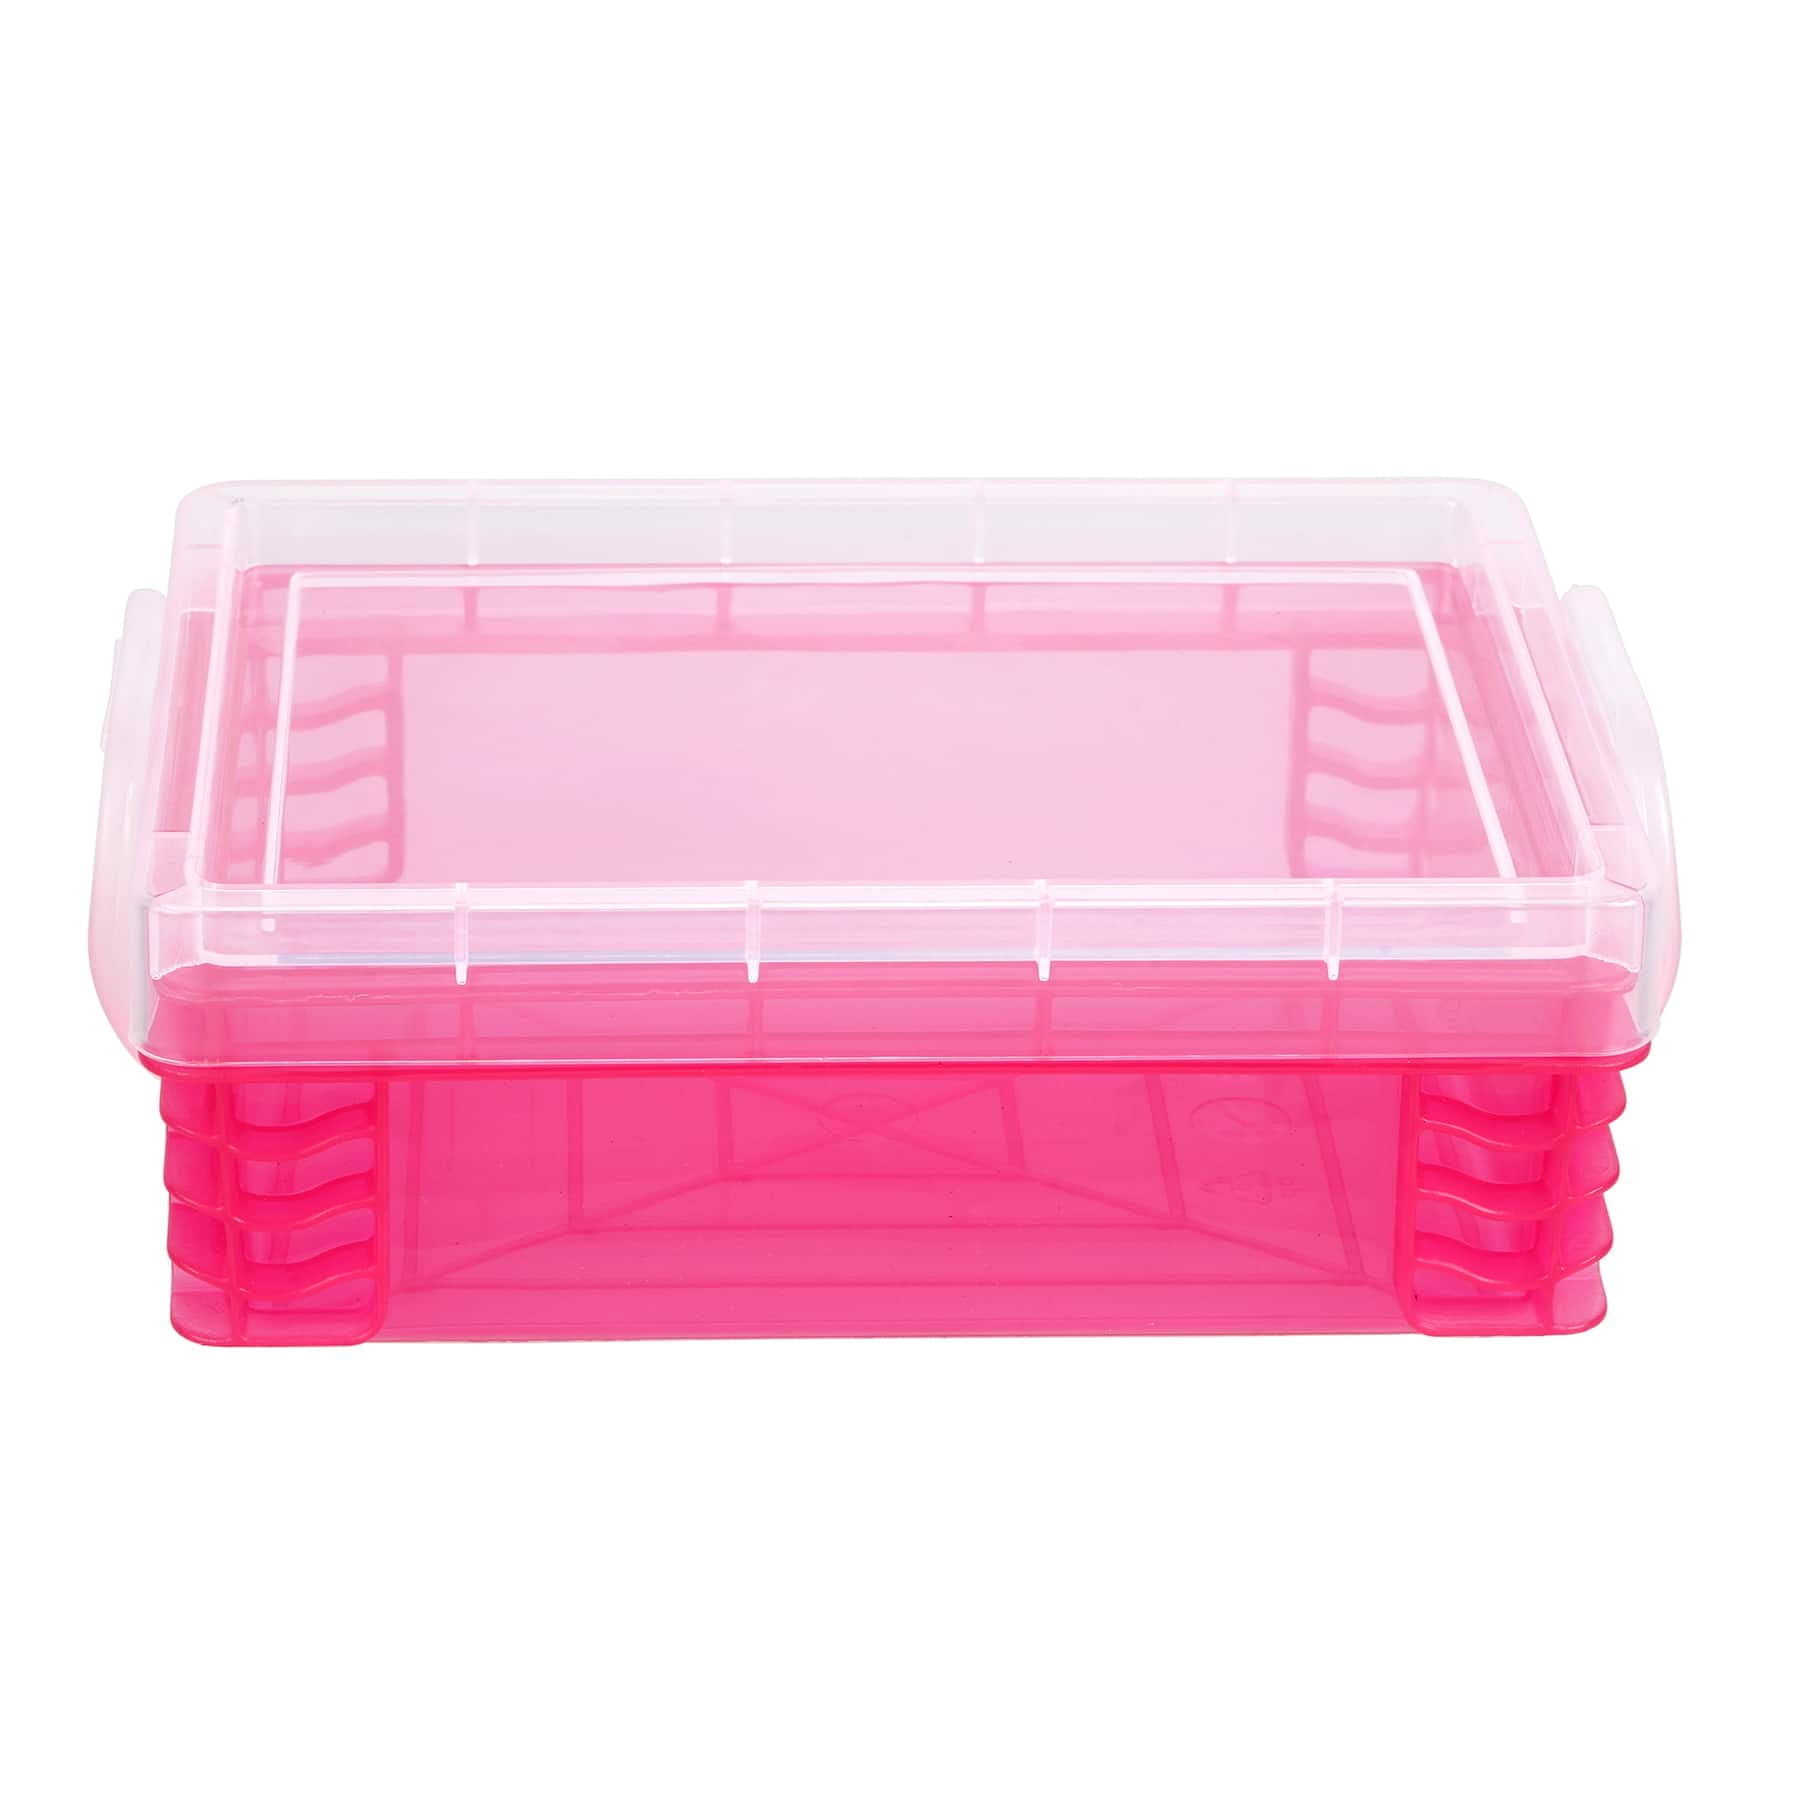 Pink Stacking Crayon Box by Simply Tidy - Plastic Storage Containers for  School Supplies, Sewing and Crafts - Bulk 32 Pack